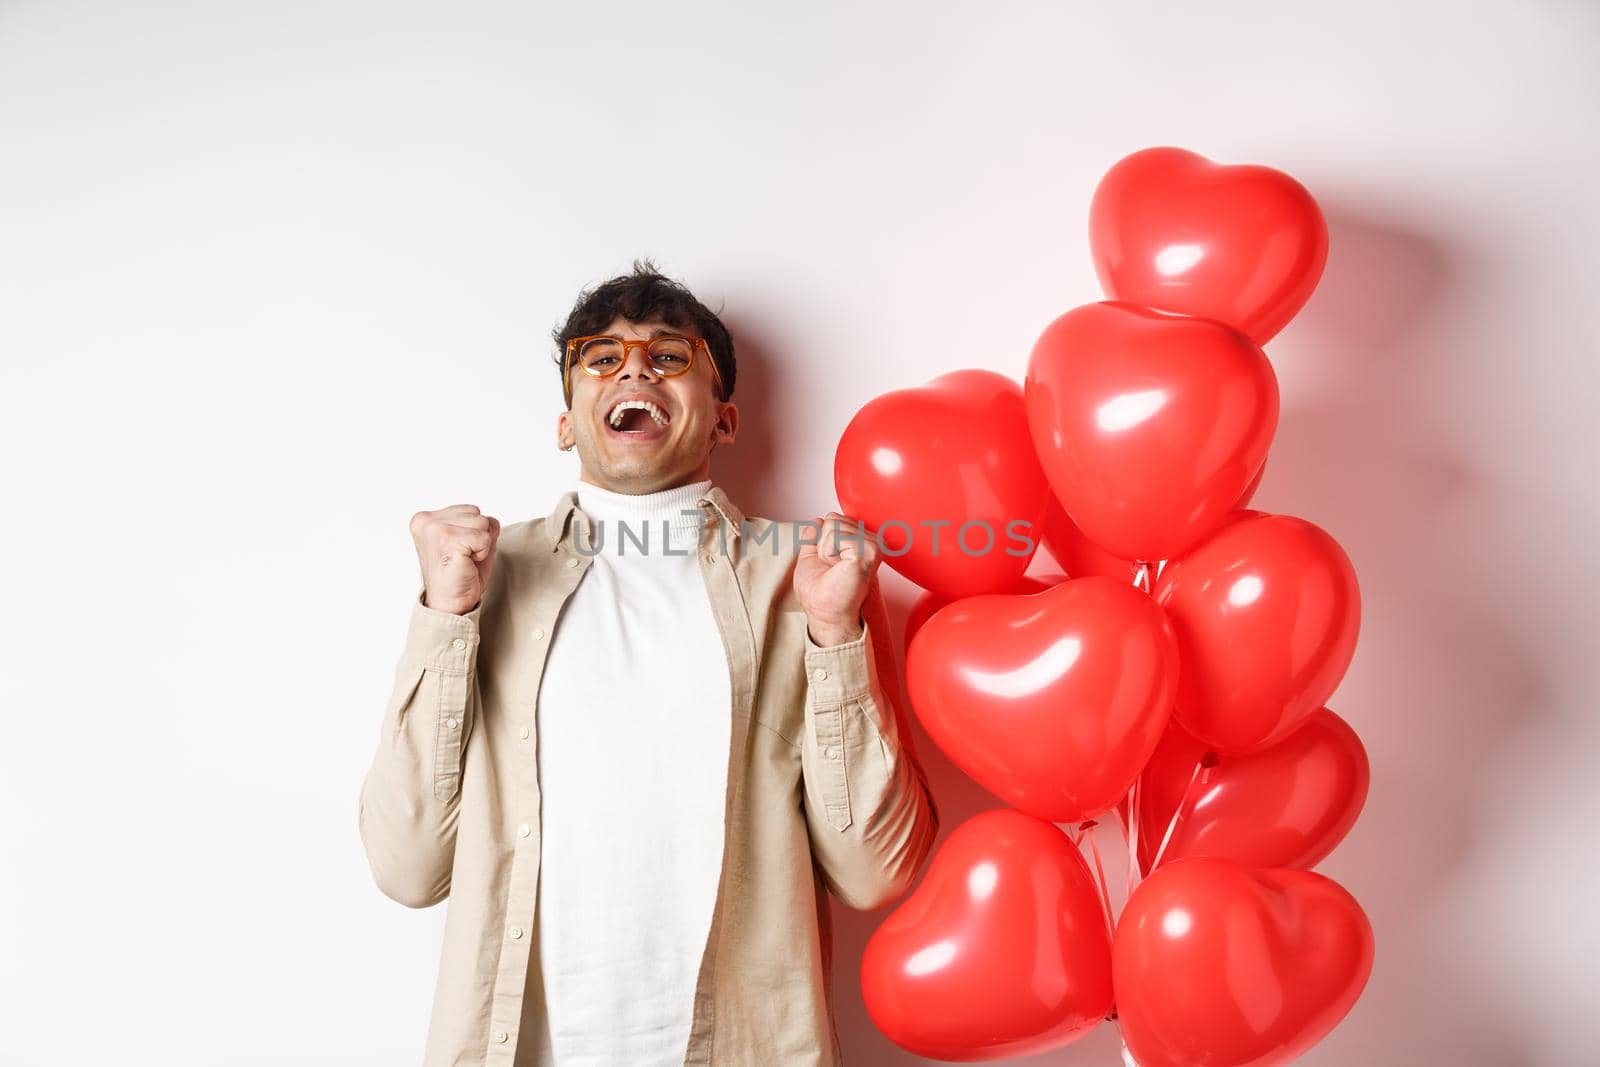 Valentines day. Happy modern man celebrating, screaming from joy and happiness, having date with lover, being in love, standing near heart balloons on white background.